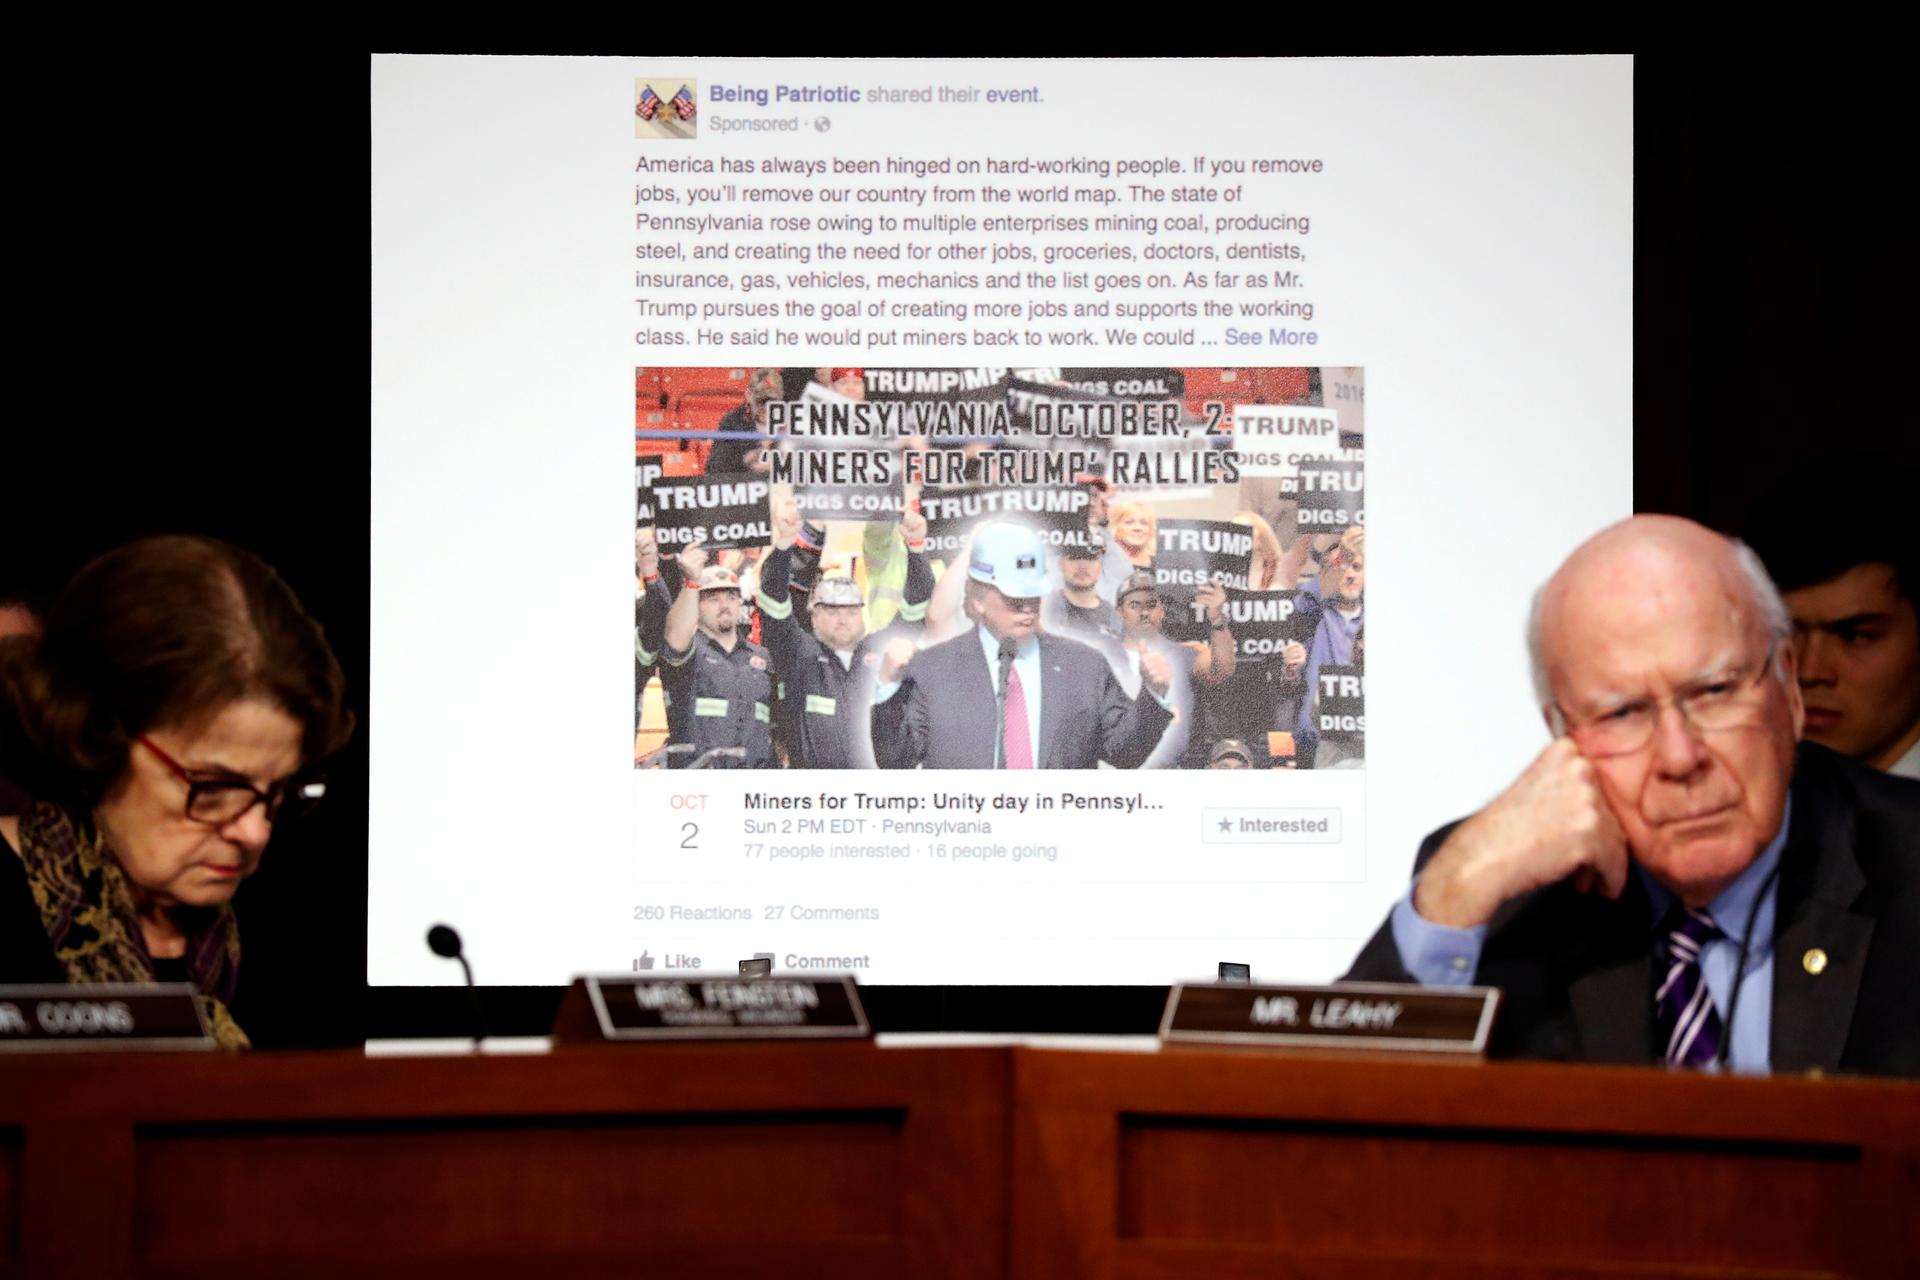 Senator Pat Leahy (D-VT) show a fake social media post for a non-existent "Miners for Trump" rally as representatives of Twitter, 